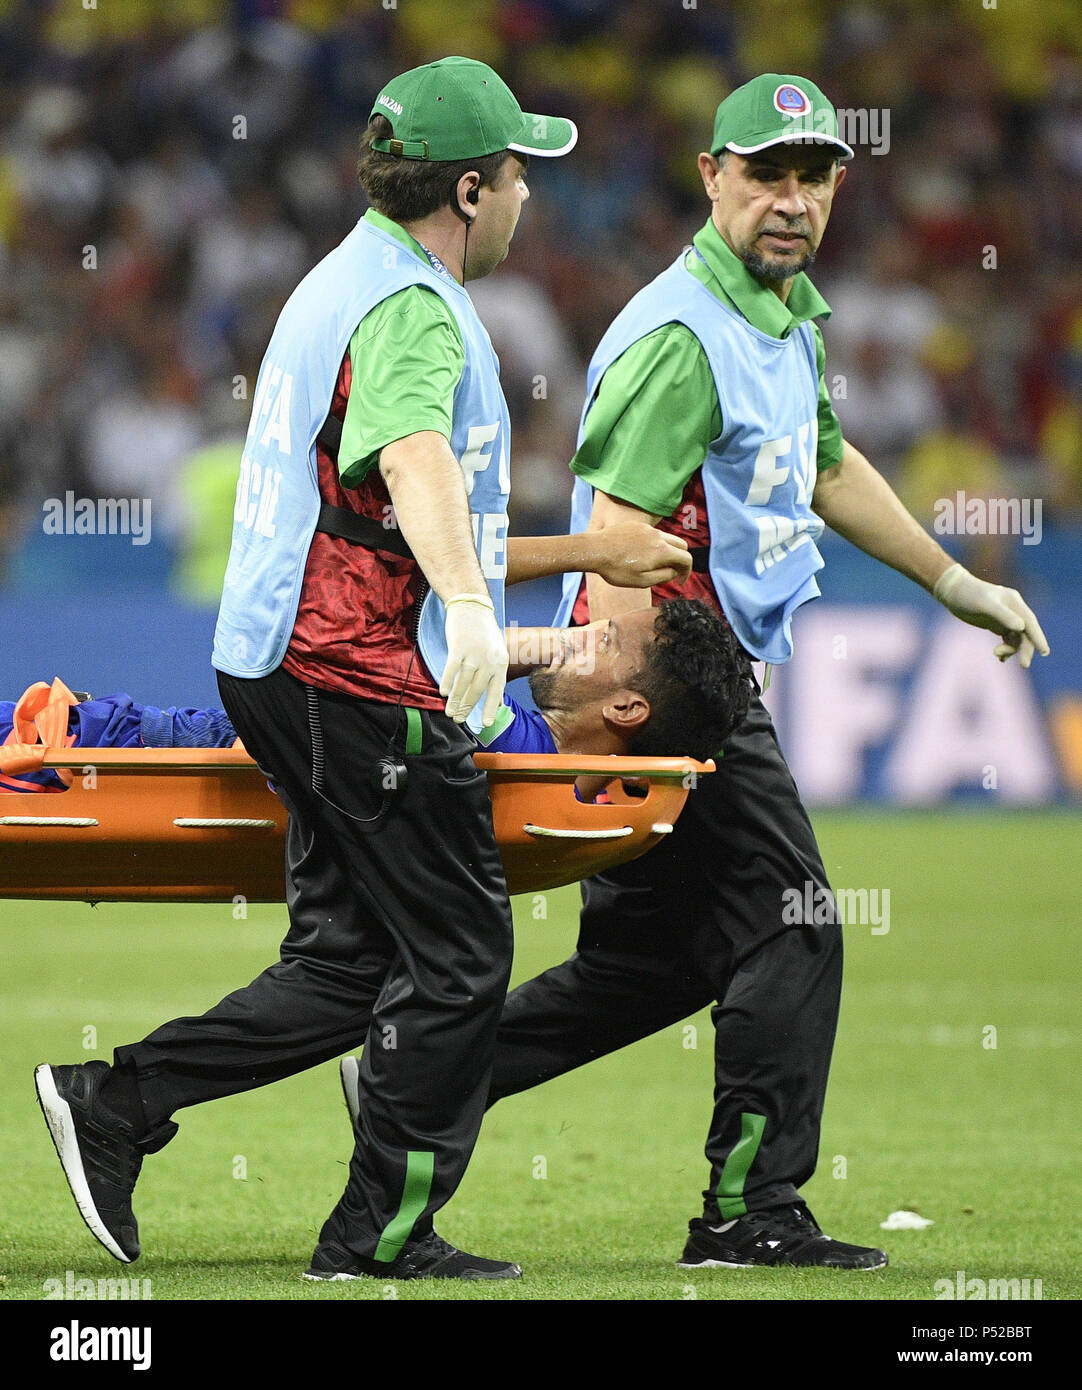 Kazan, Russia. 24th June, 2018. Abel Aguilar of Colombia is carried out of the pitch after his injury during the 2018 FIFA World Cup Group H match between Poland and Colombia in Kazan, Russia, June 24, 2018. Credit: Lui Siu Wai/Xinhua/Alamy Live News Stock Photo